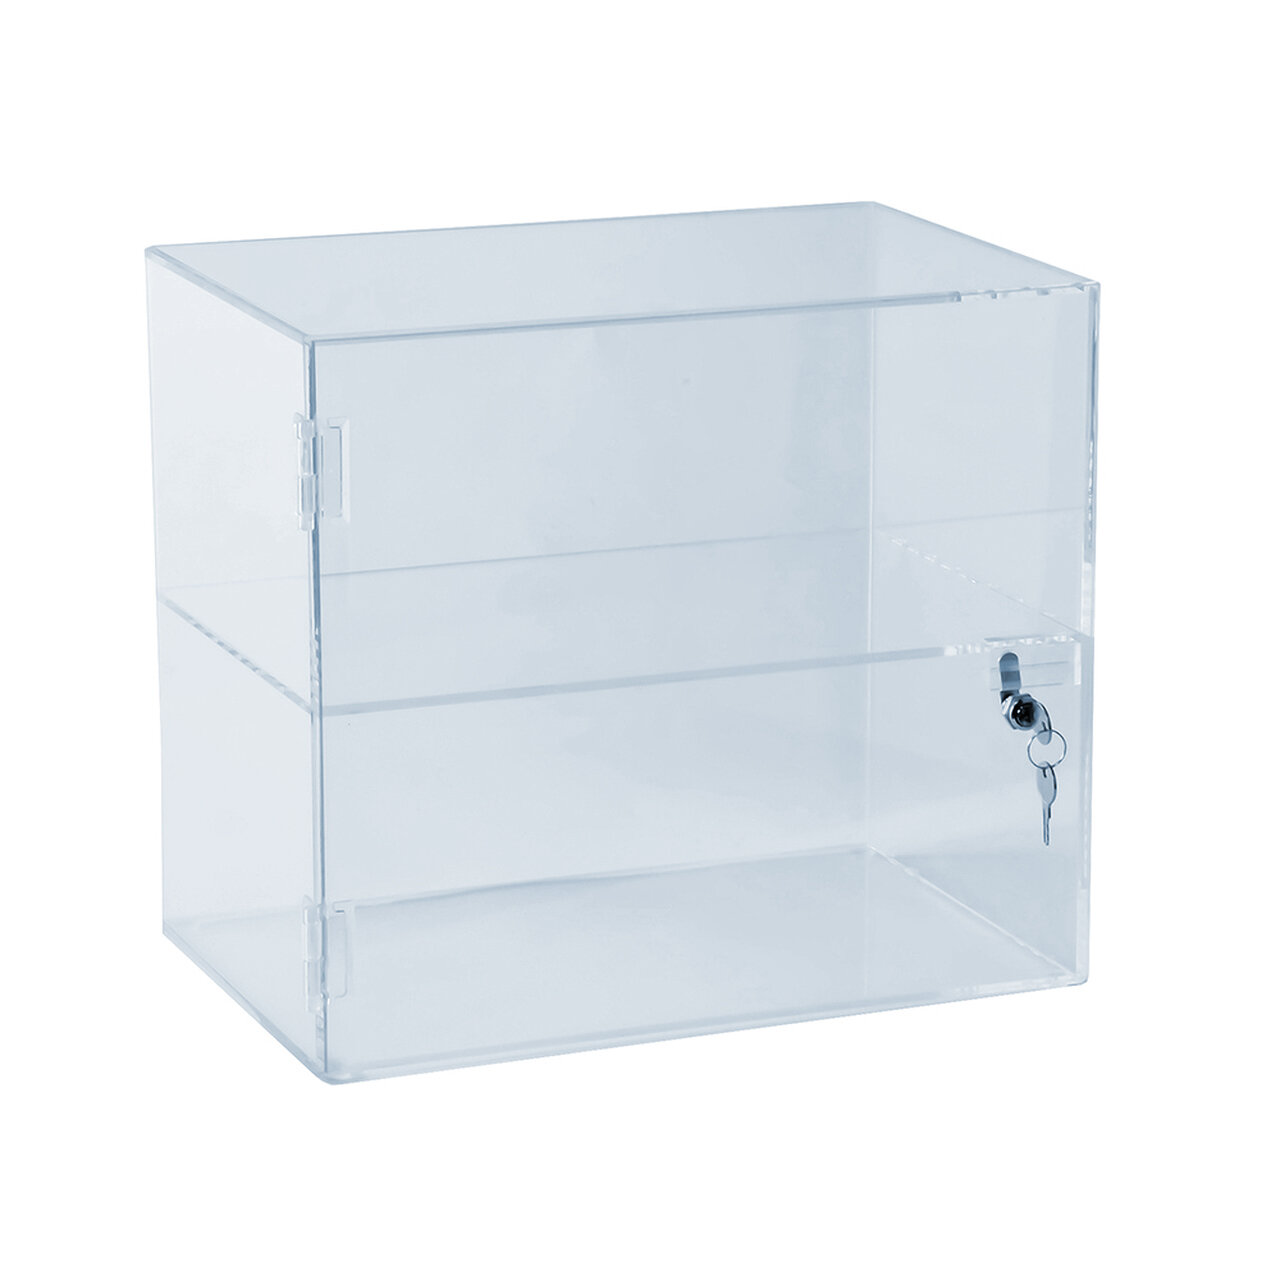 NEW 5 Shelf Acrylic Counter Top Display Case with lock 